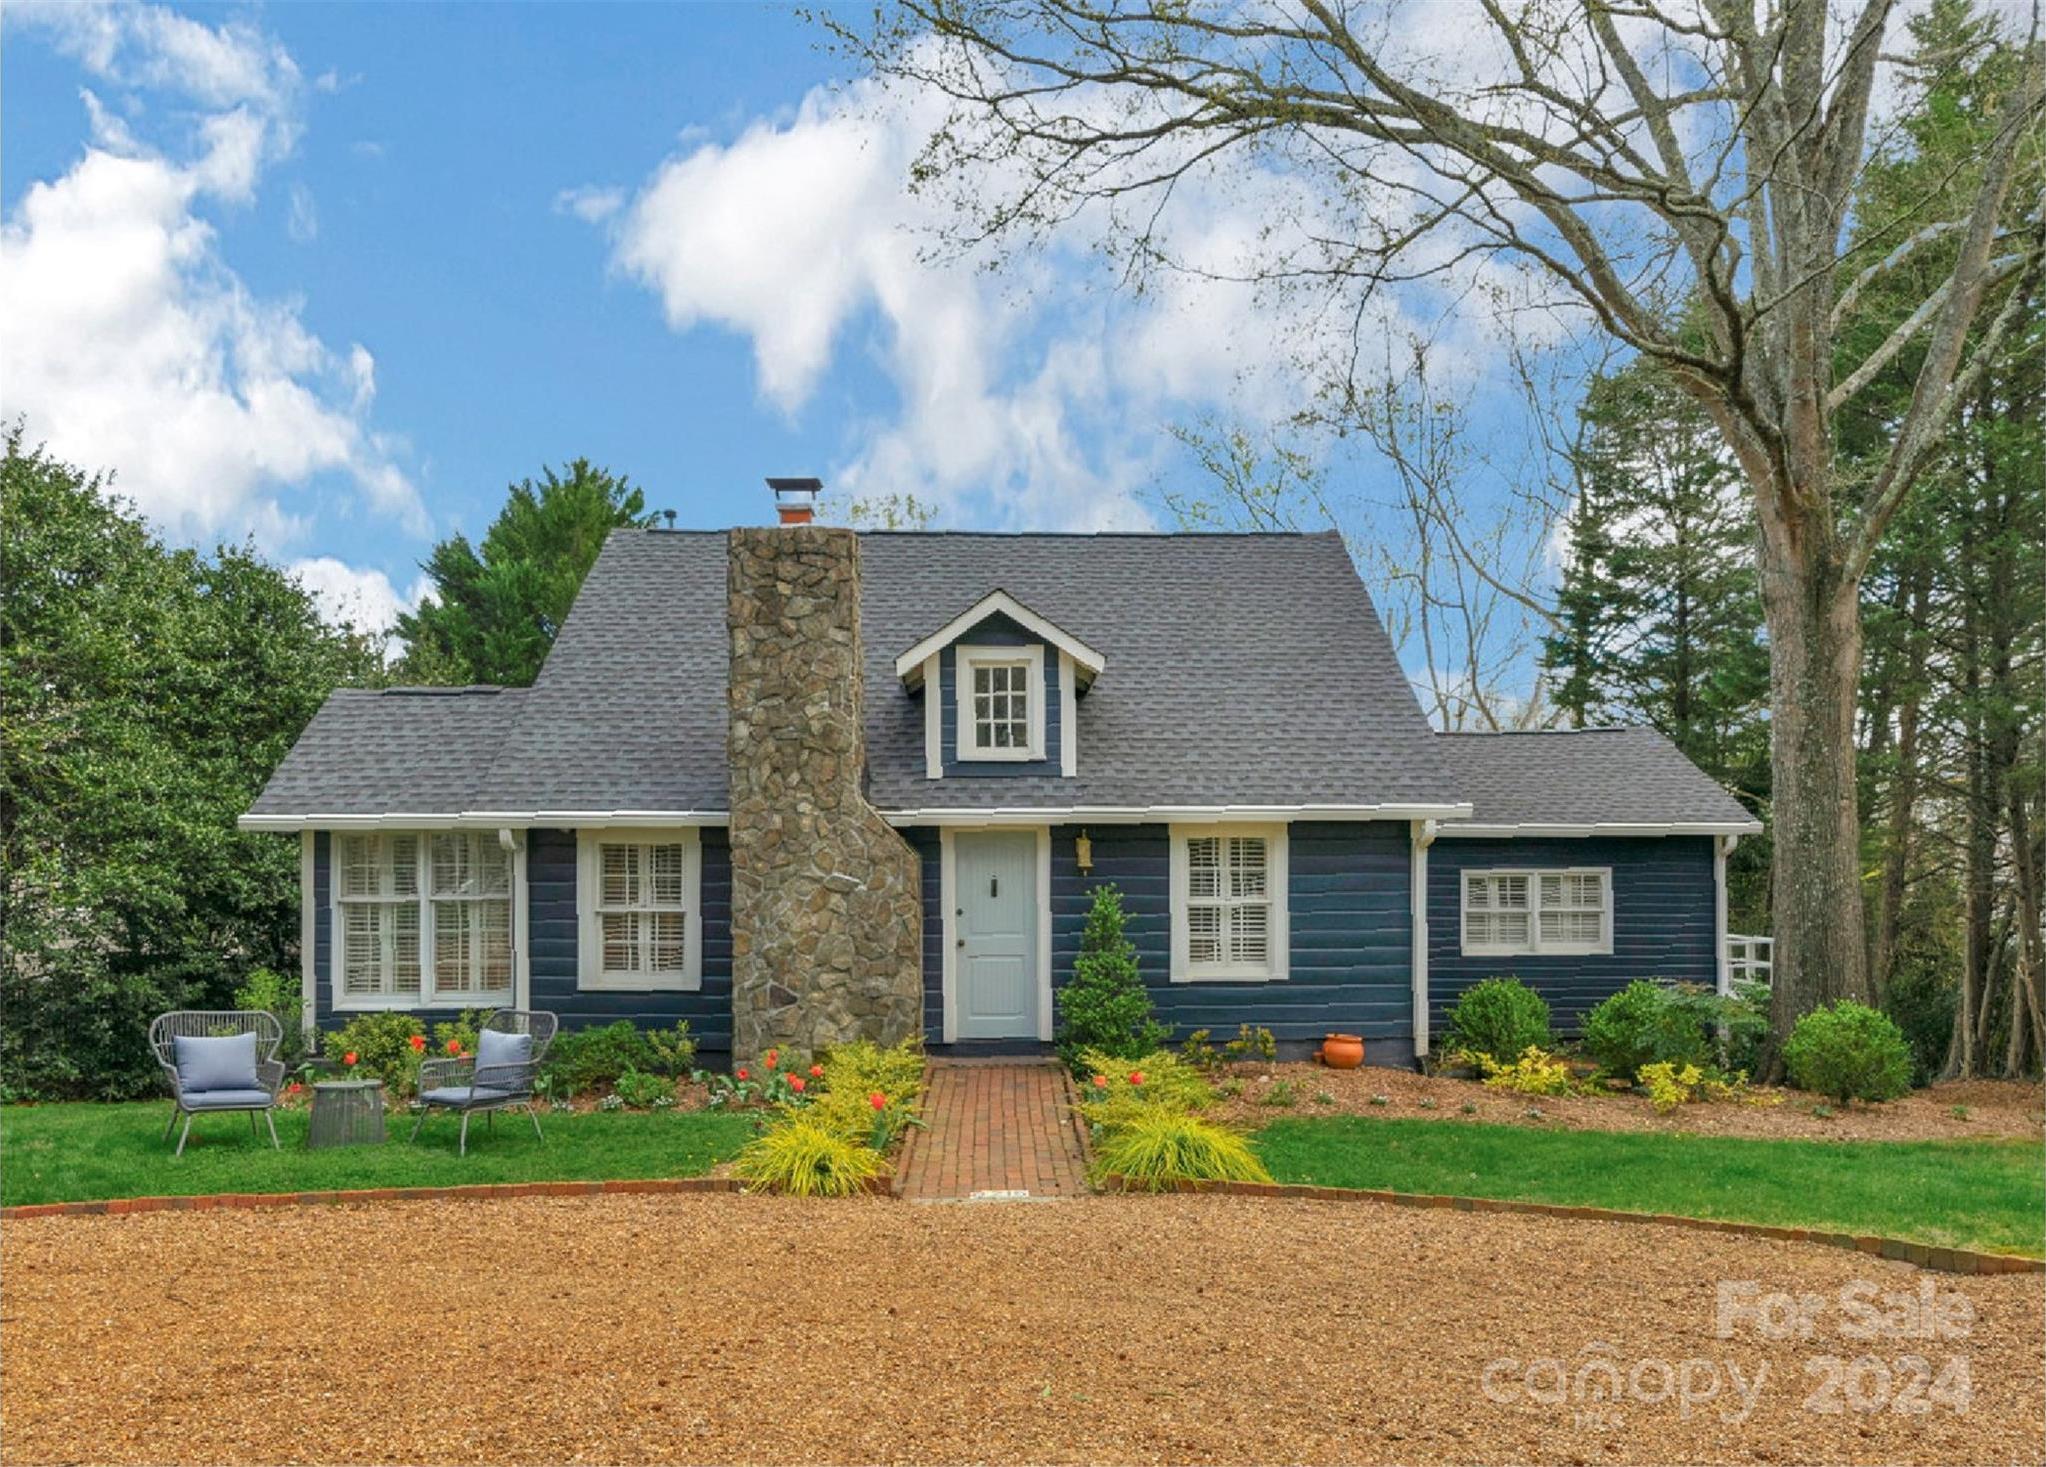 Photo one of 6215 Sharon Acres Rd Charlotte NC 28210 | MLS 4118382